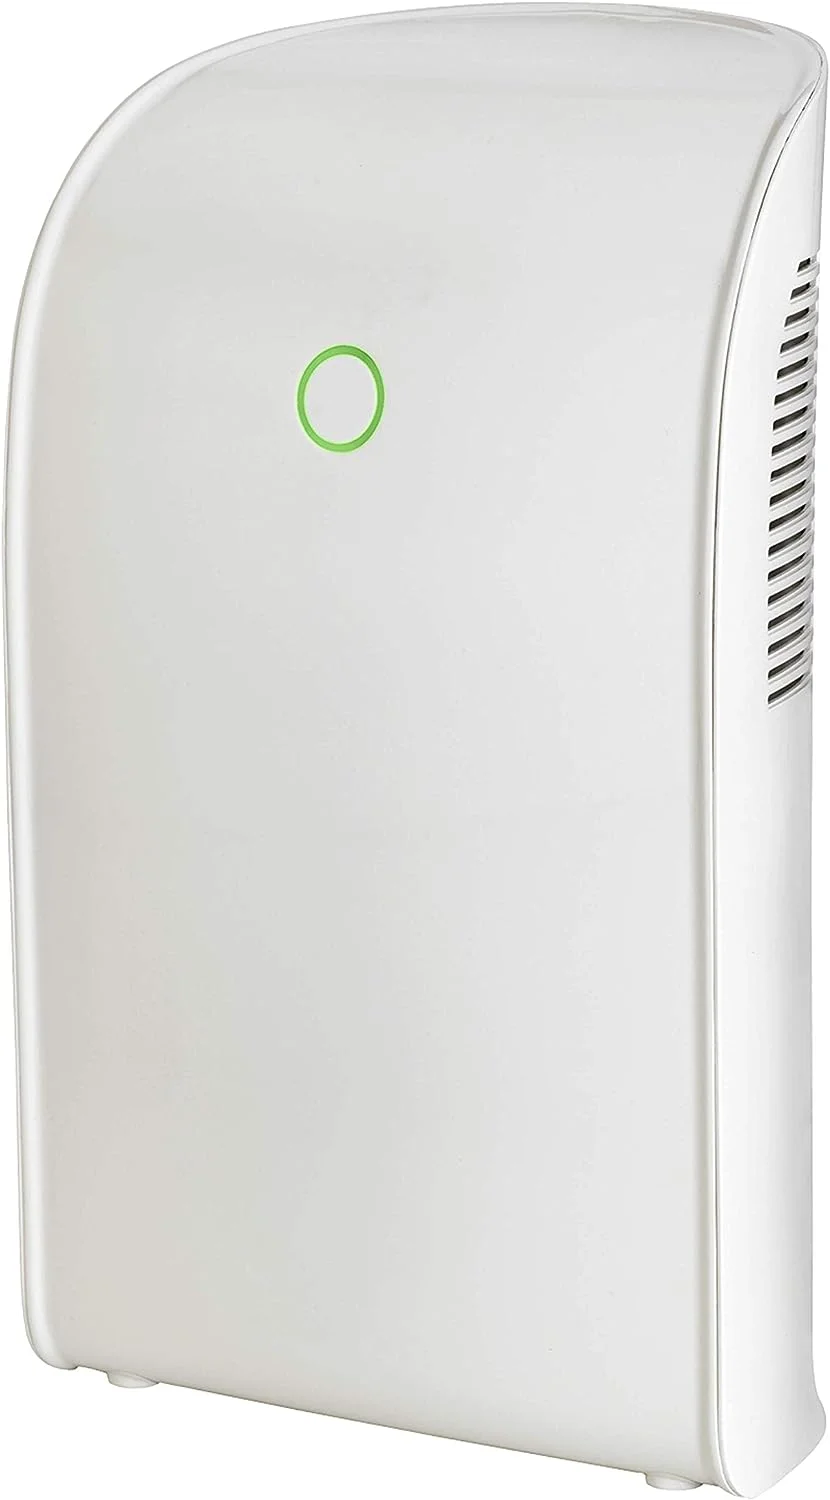 

Guardian DH201WCA Small Room Dehumidifier for Allergen and Odor Control in Closets, Kitchens, Laundry Rooms, and Bathrooms, Ultr